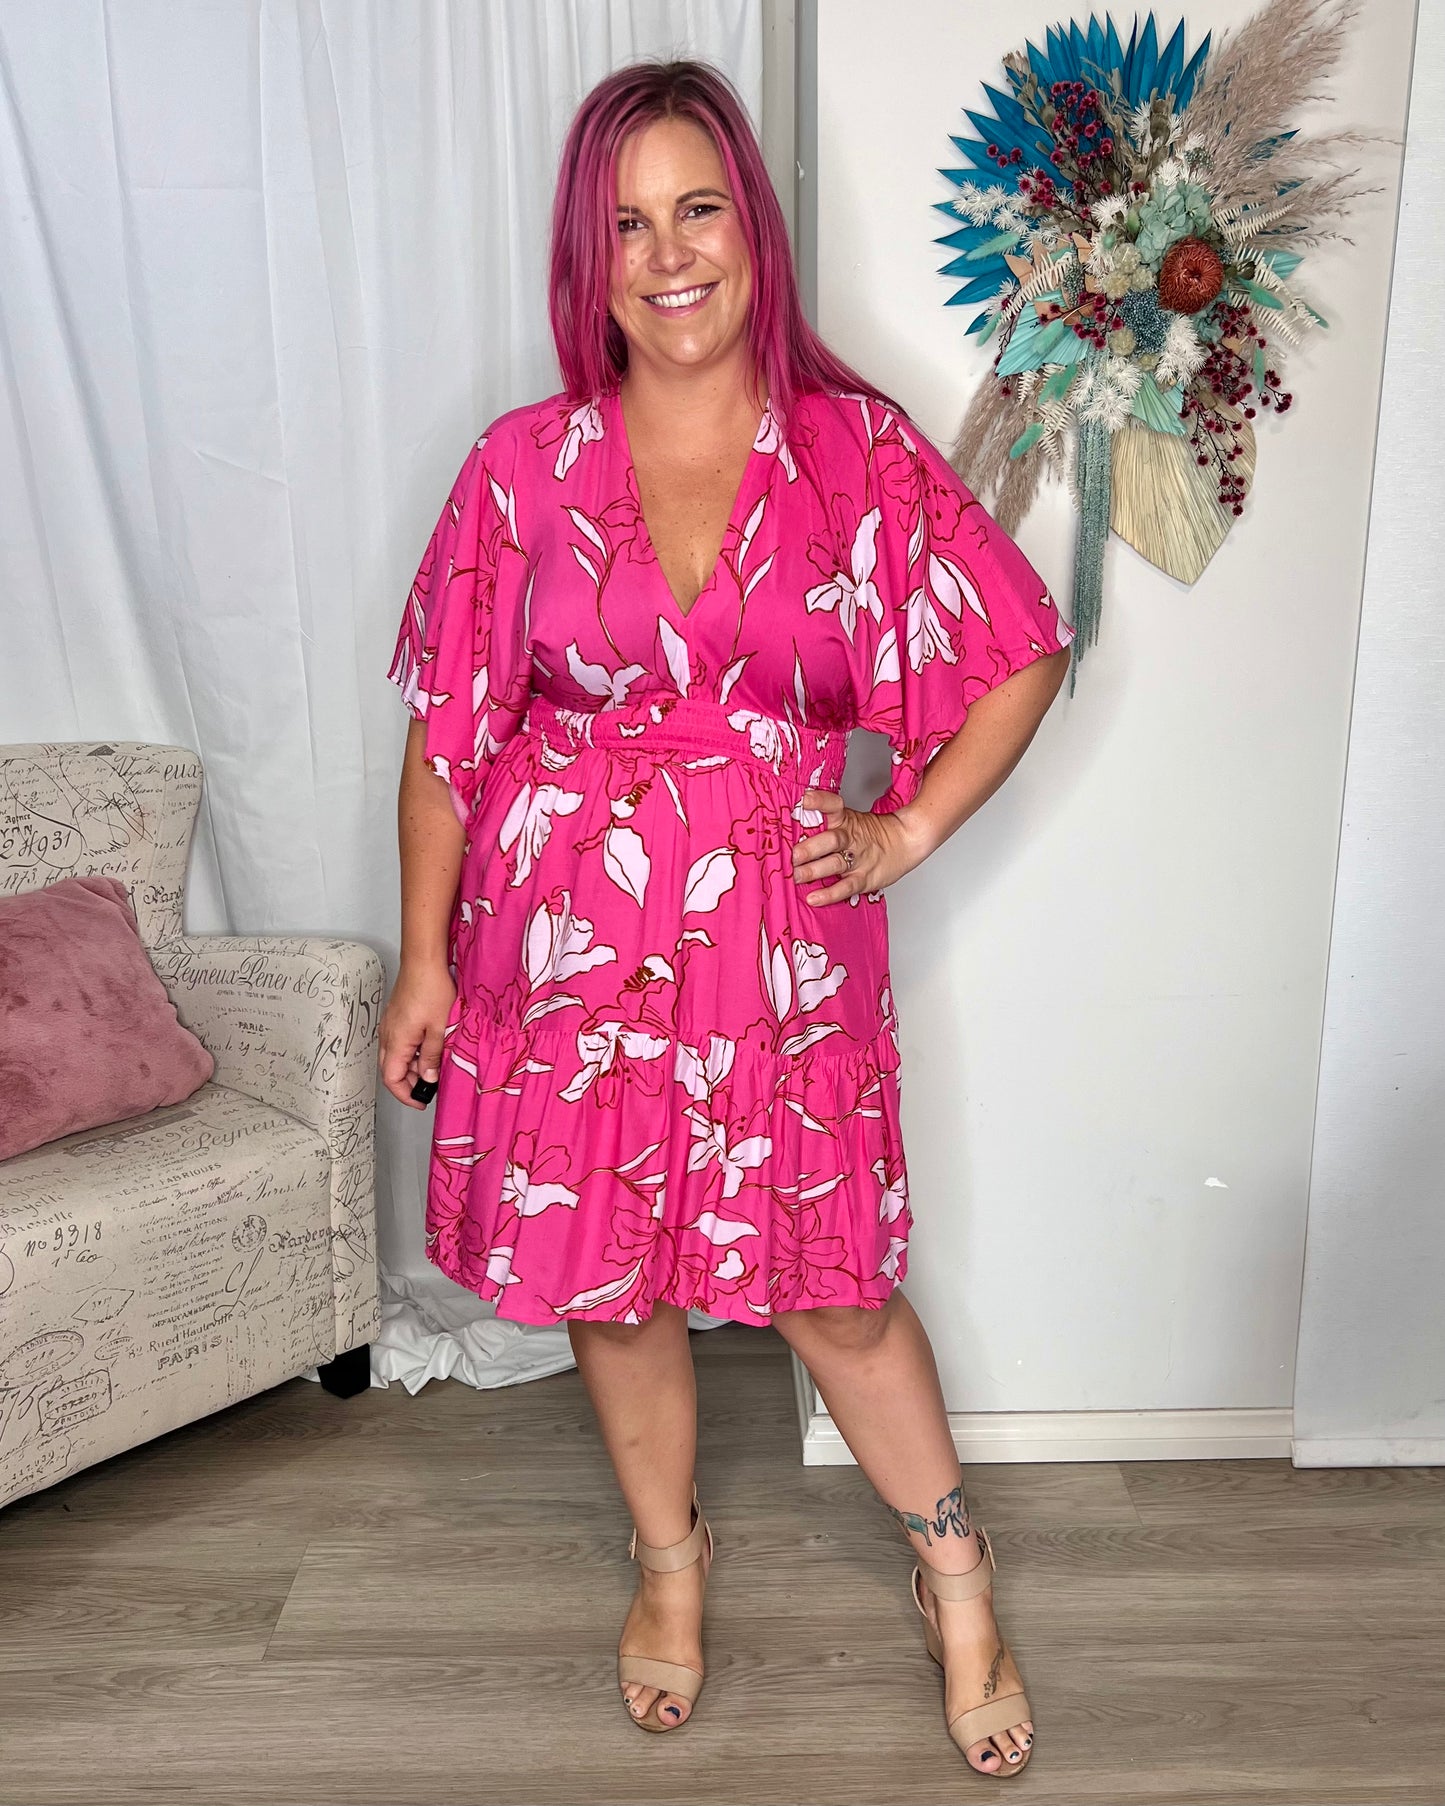 ***NEW*** Kali Mini Dress: Kali is a super cute mini dress with balloon sleeves and a super cute neckline, making it an easy chuck on and go that will make you look amazing
Features:

Shirred  - Ciao Bella Dresses 